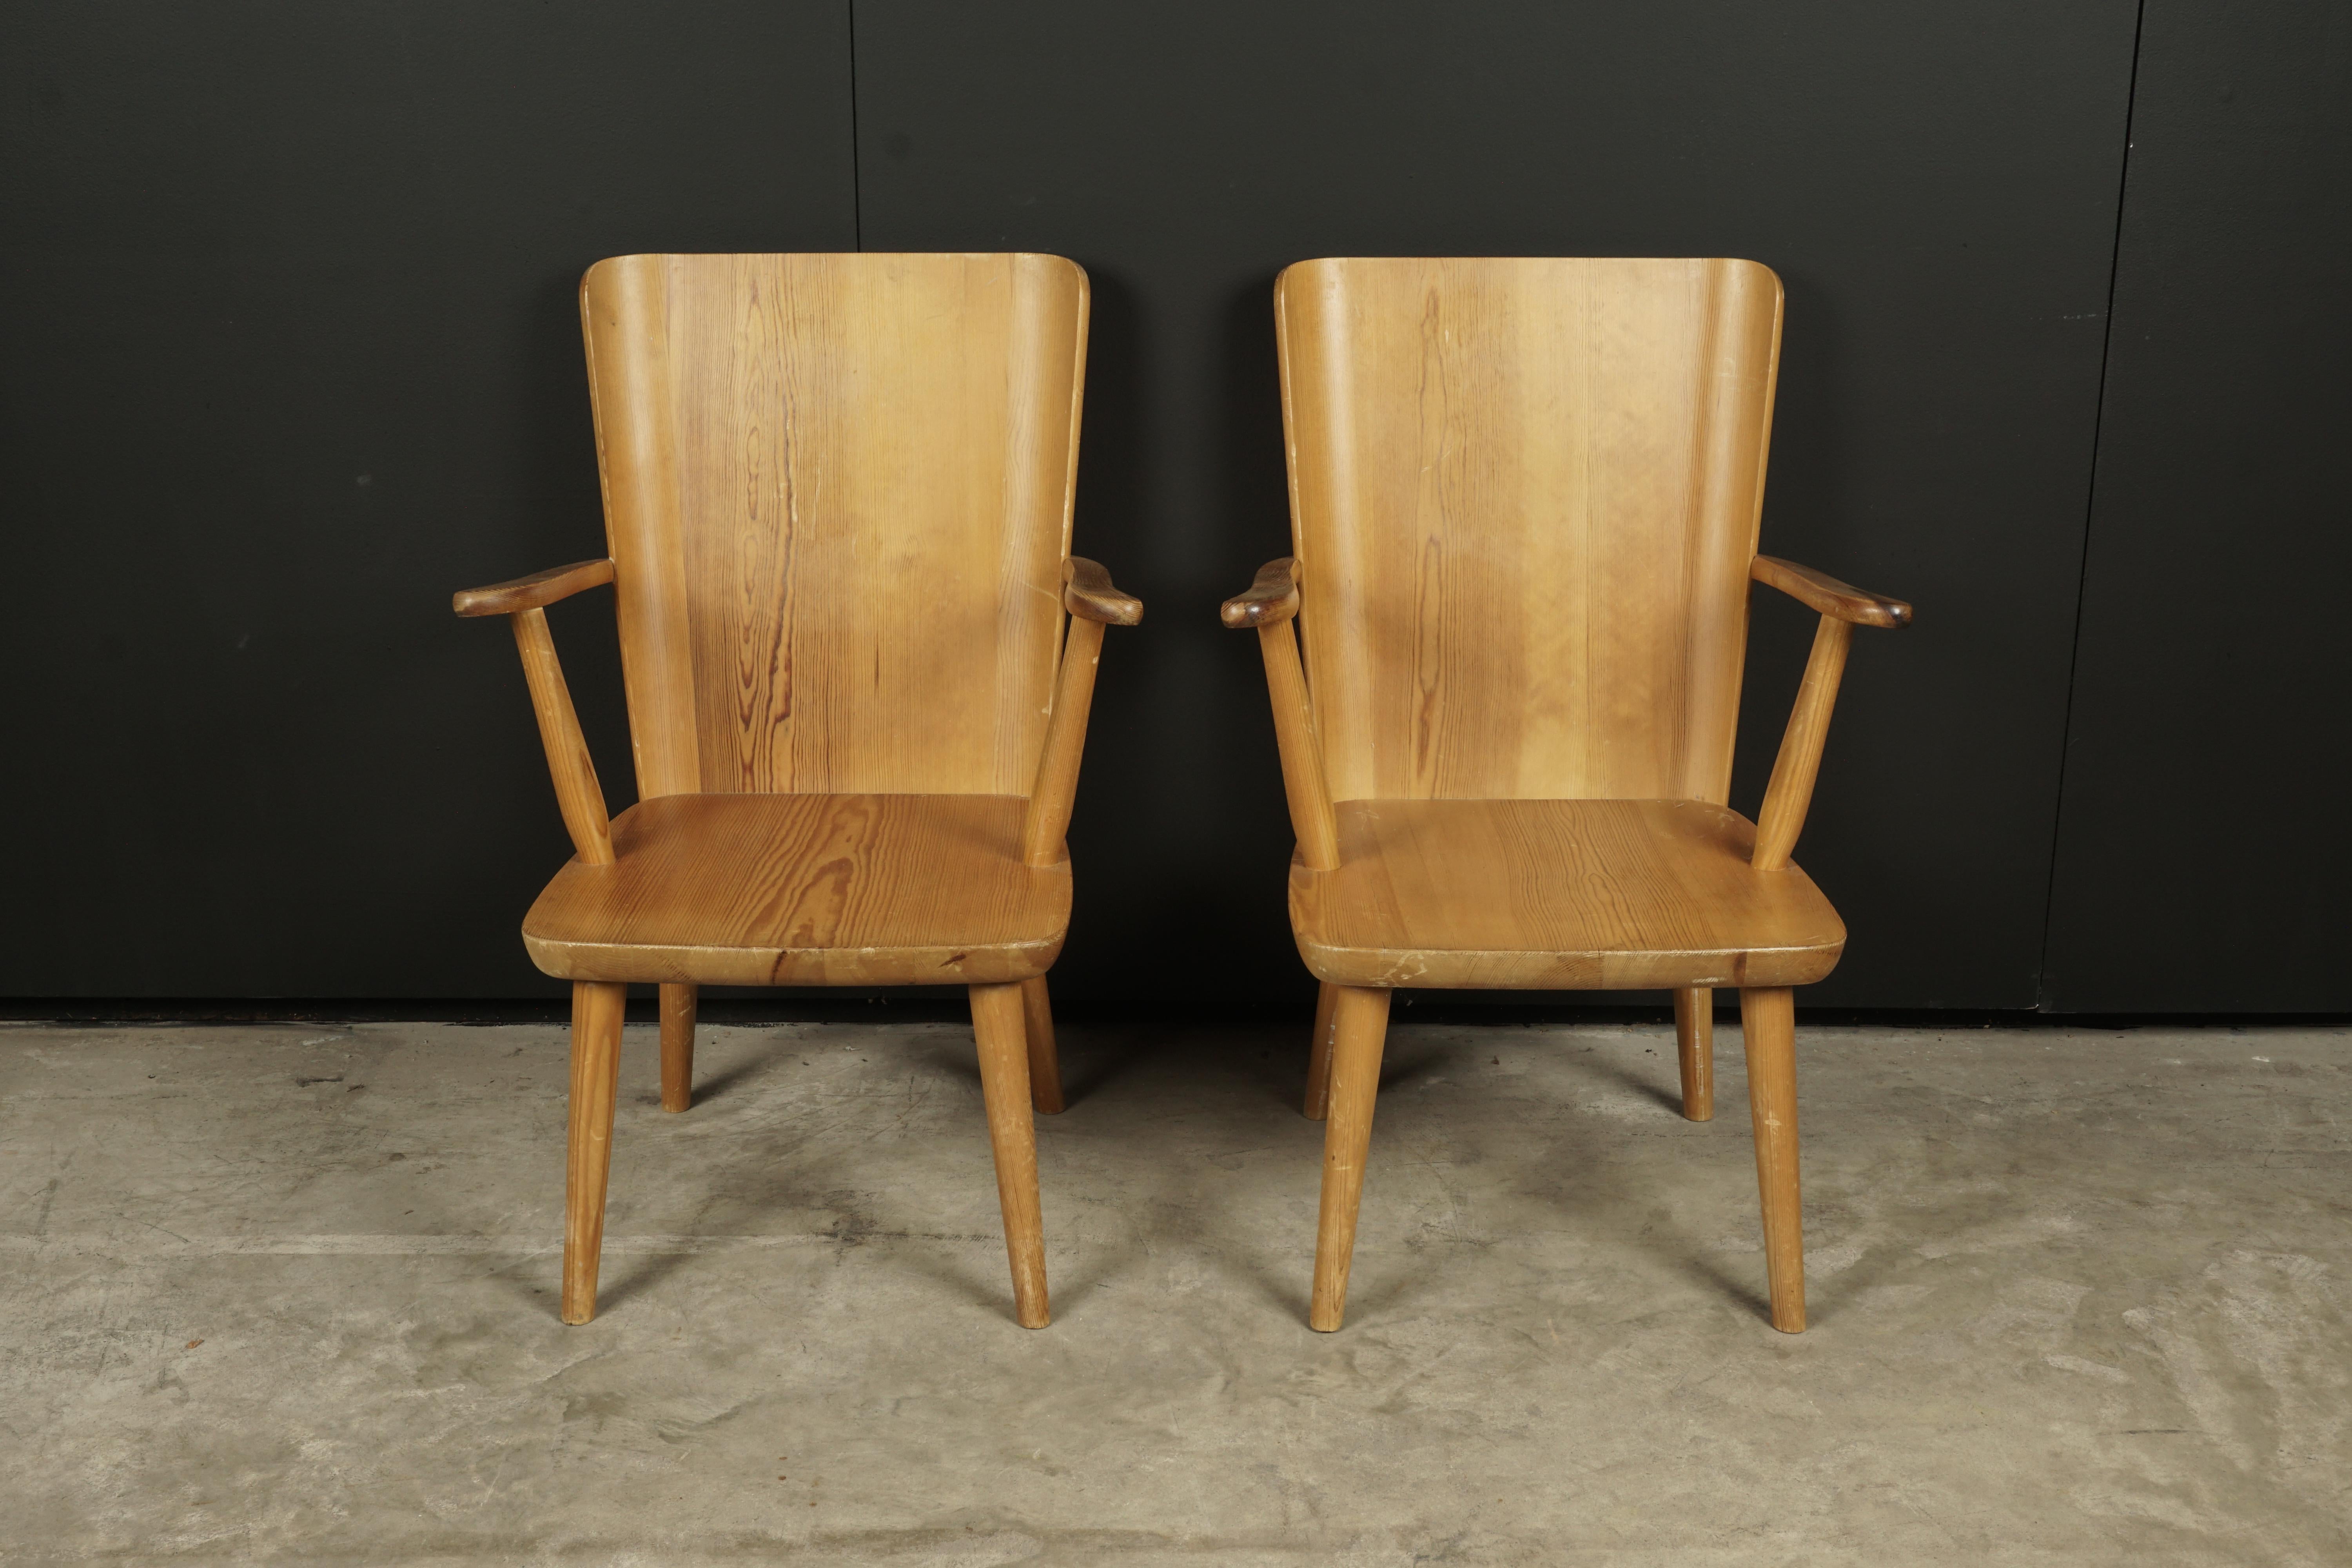 Vintage pair of Svensk fur armchairs designed by Göran Malmvall, Sweden, circa 1940. Solid pine construction with light wear and patina.